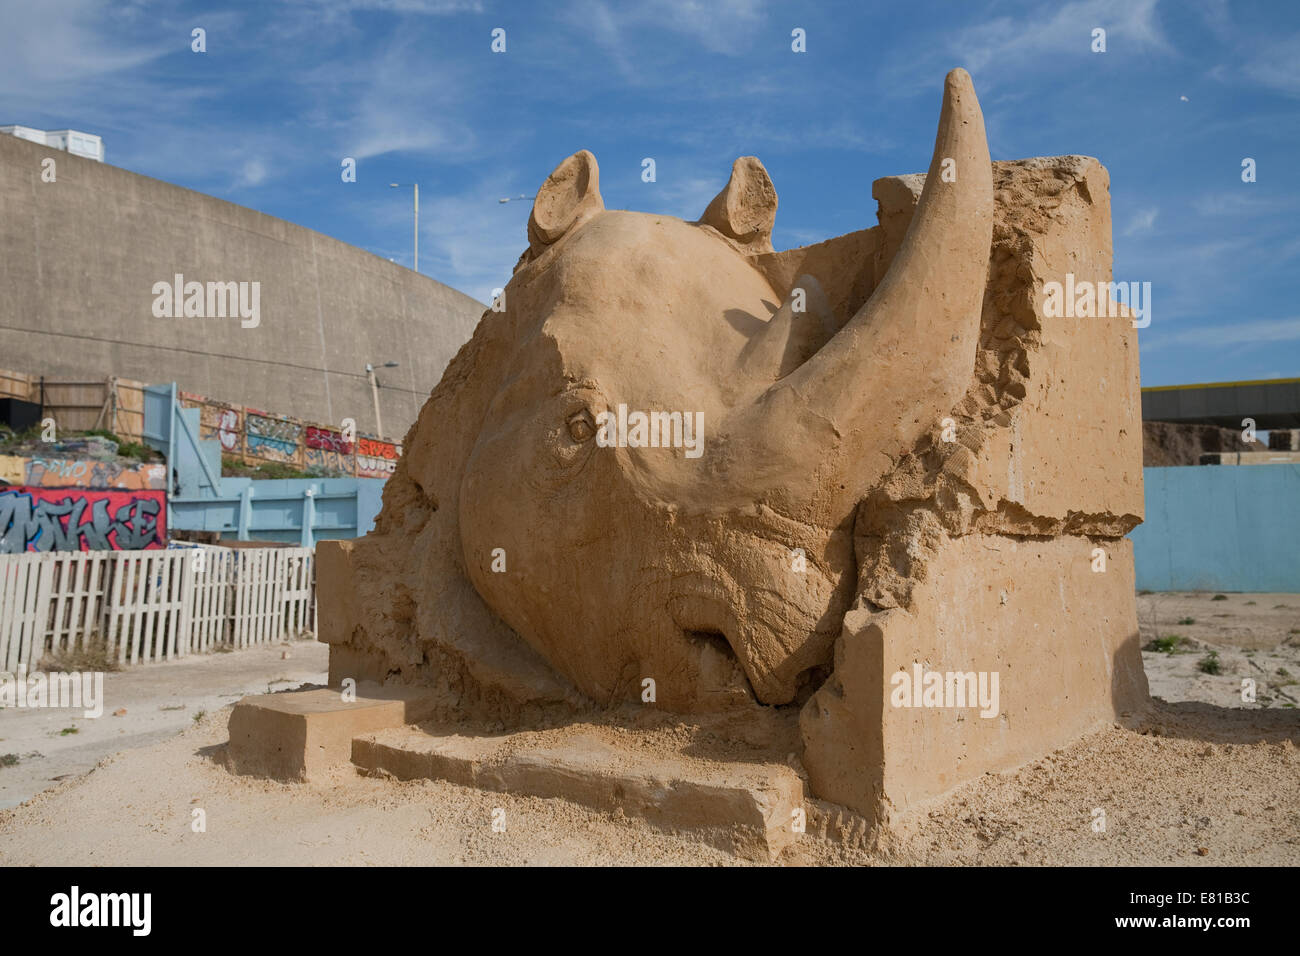 Rhino is one of the big five animals on display at the Sand Sculpture festival in Brighton Stock Photo